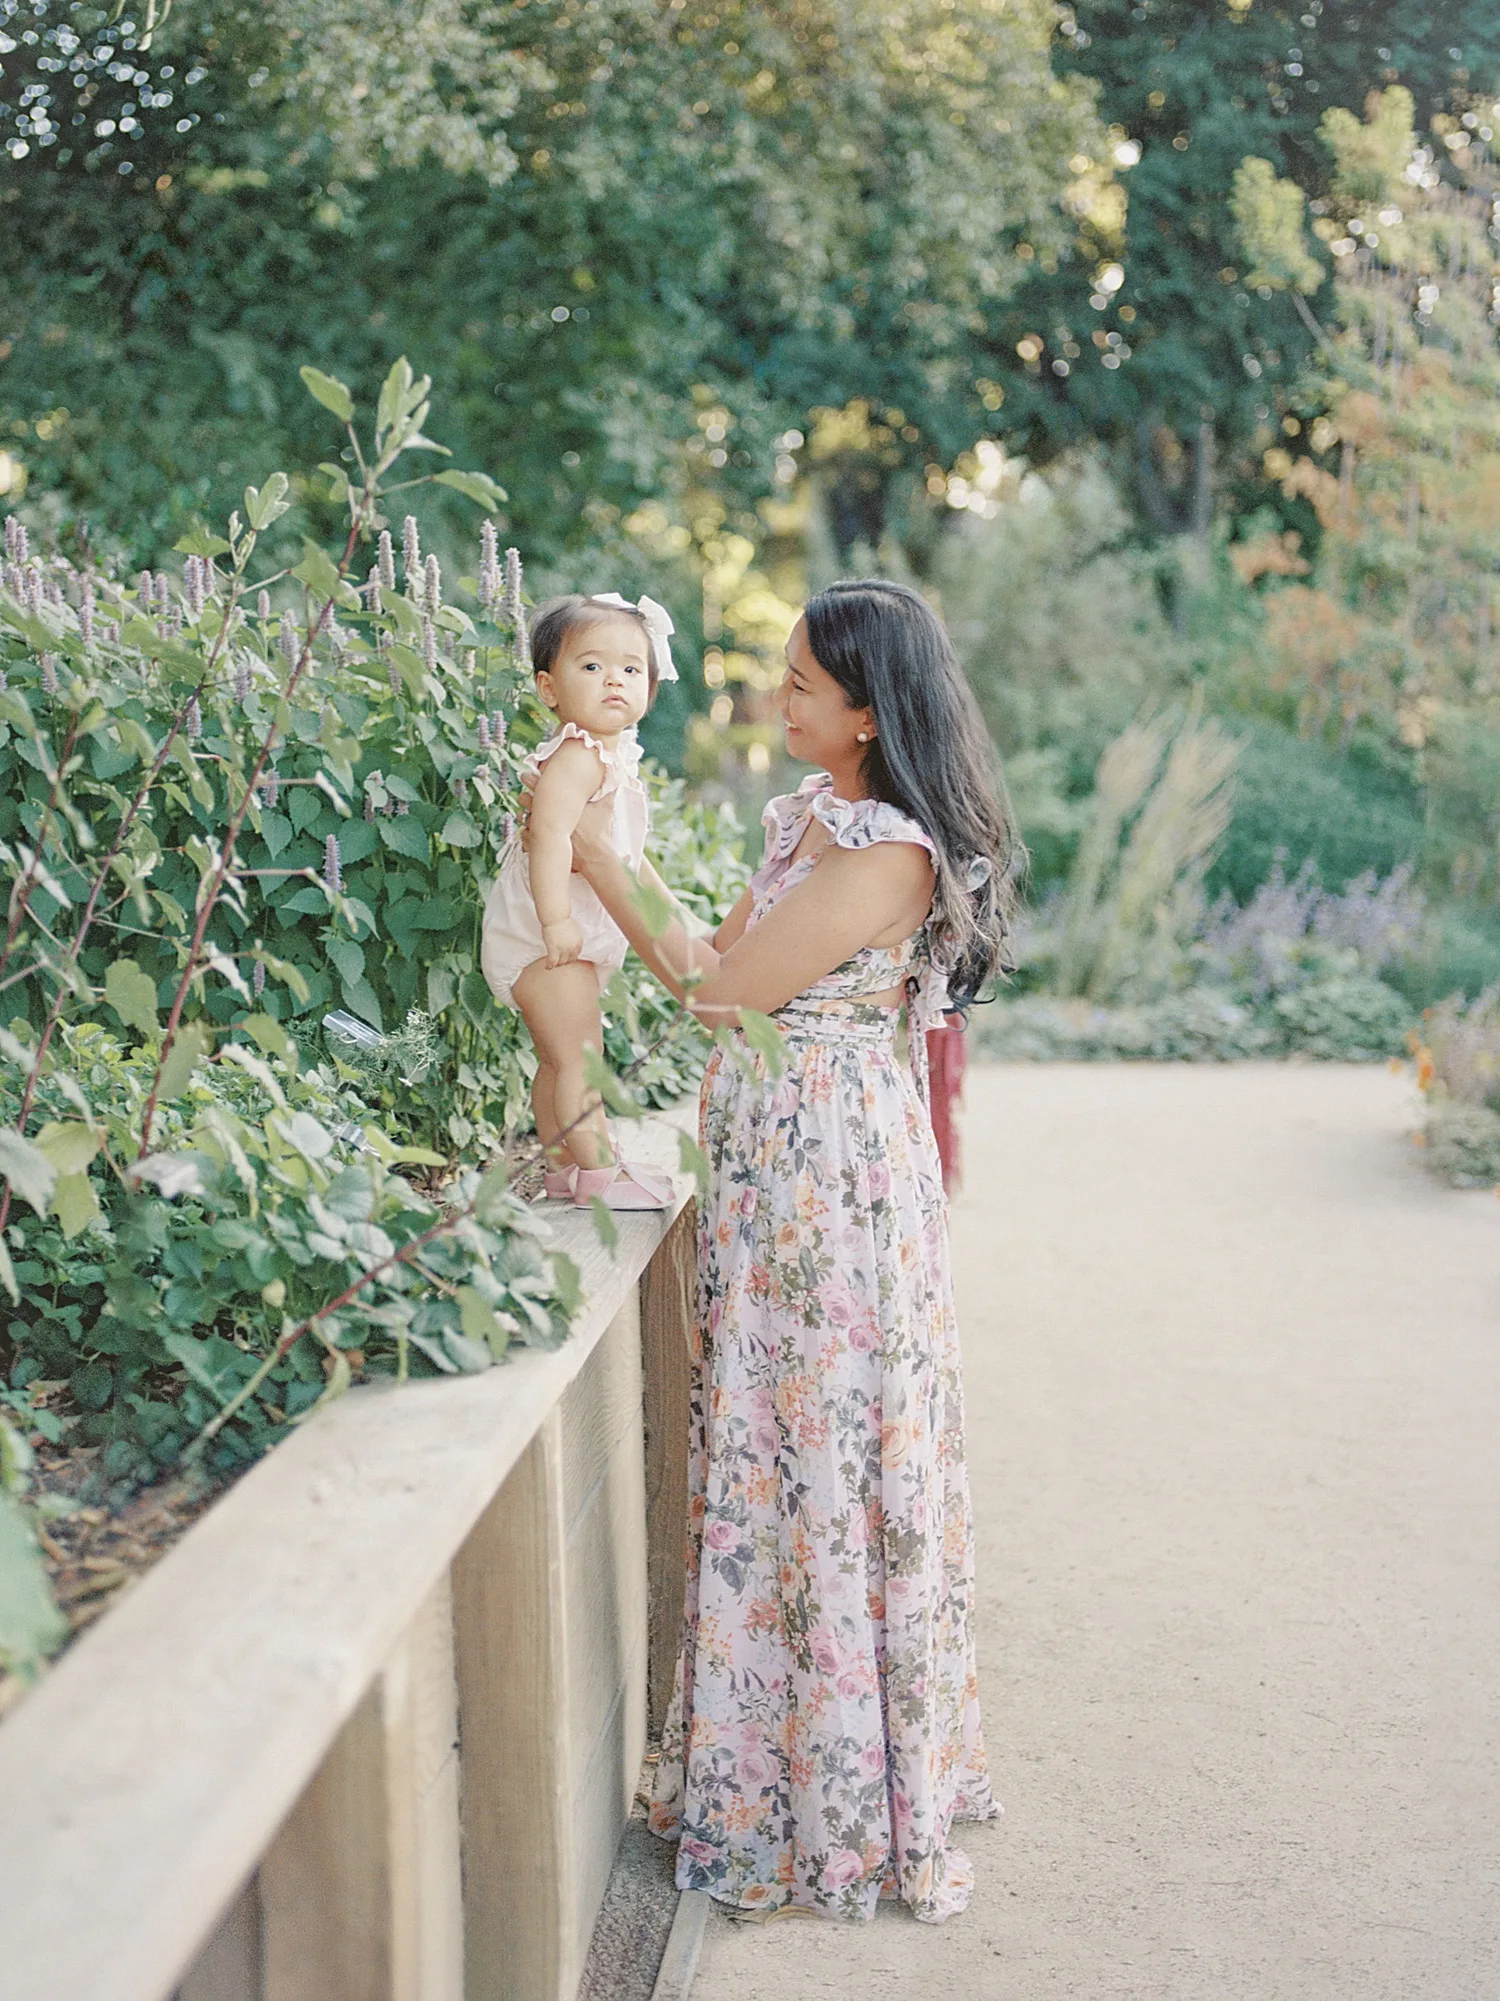 Mother and daughter portrait by Julia Shelepova - Palo Alto family photographer